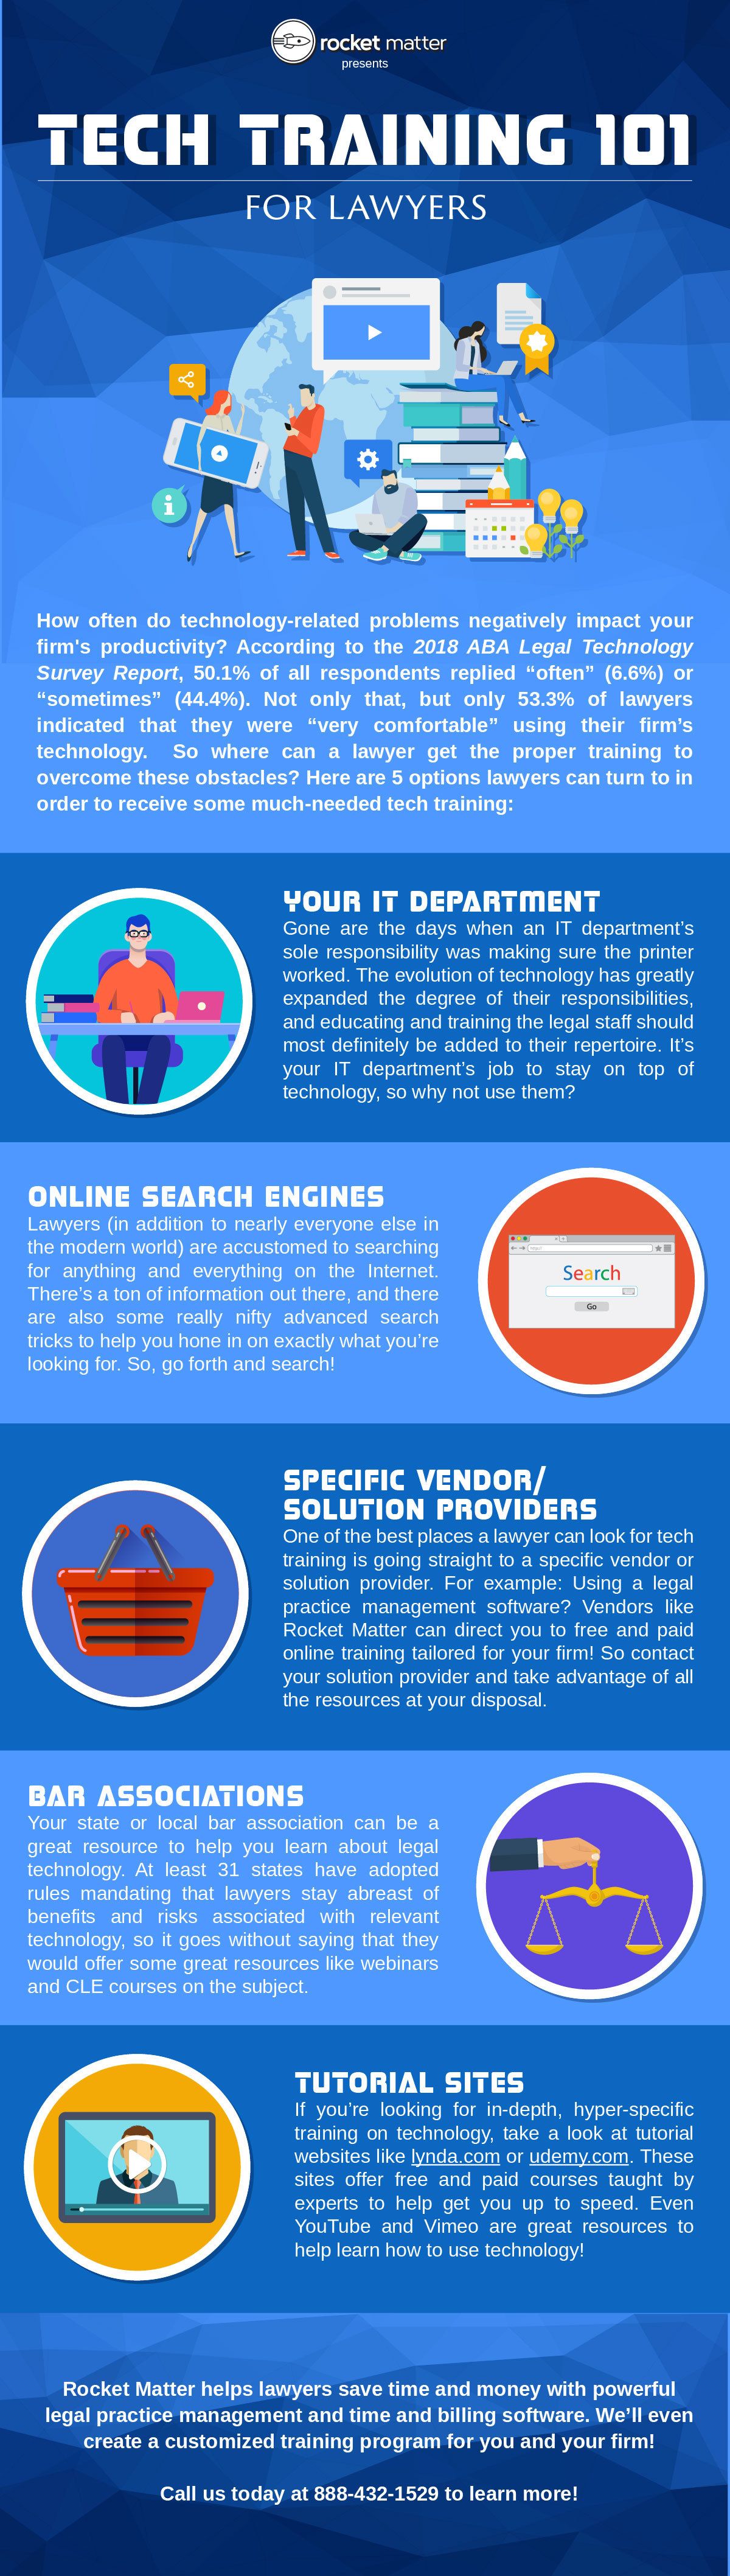 Tech Training 101 for Lawyers Infographic